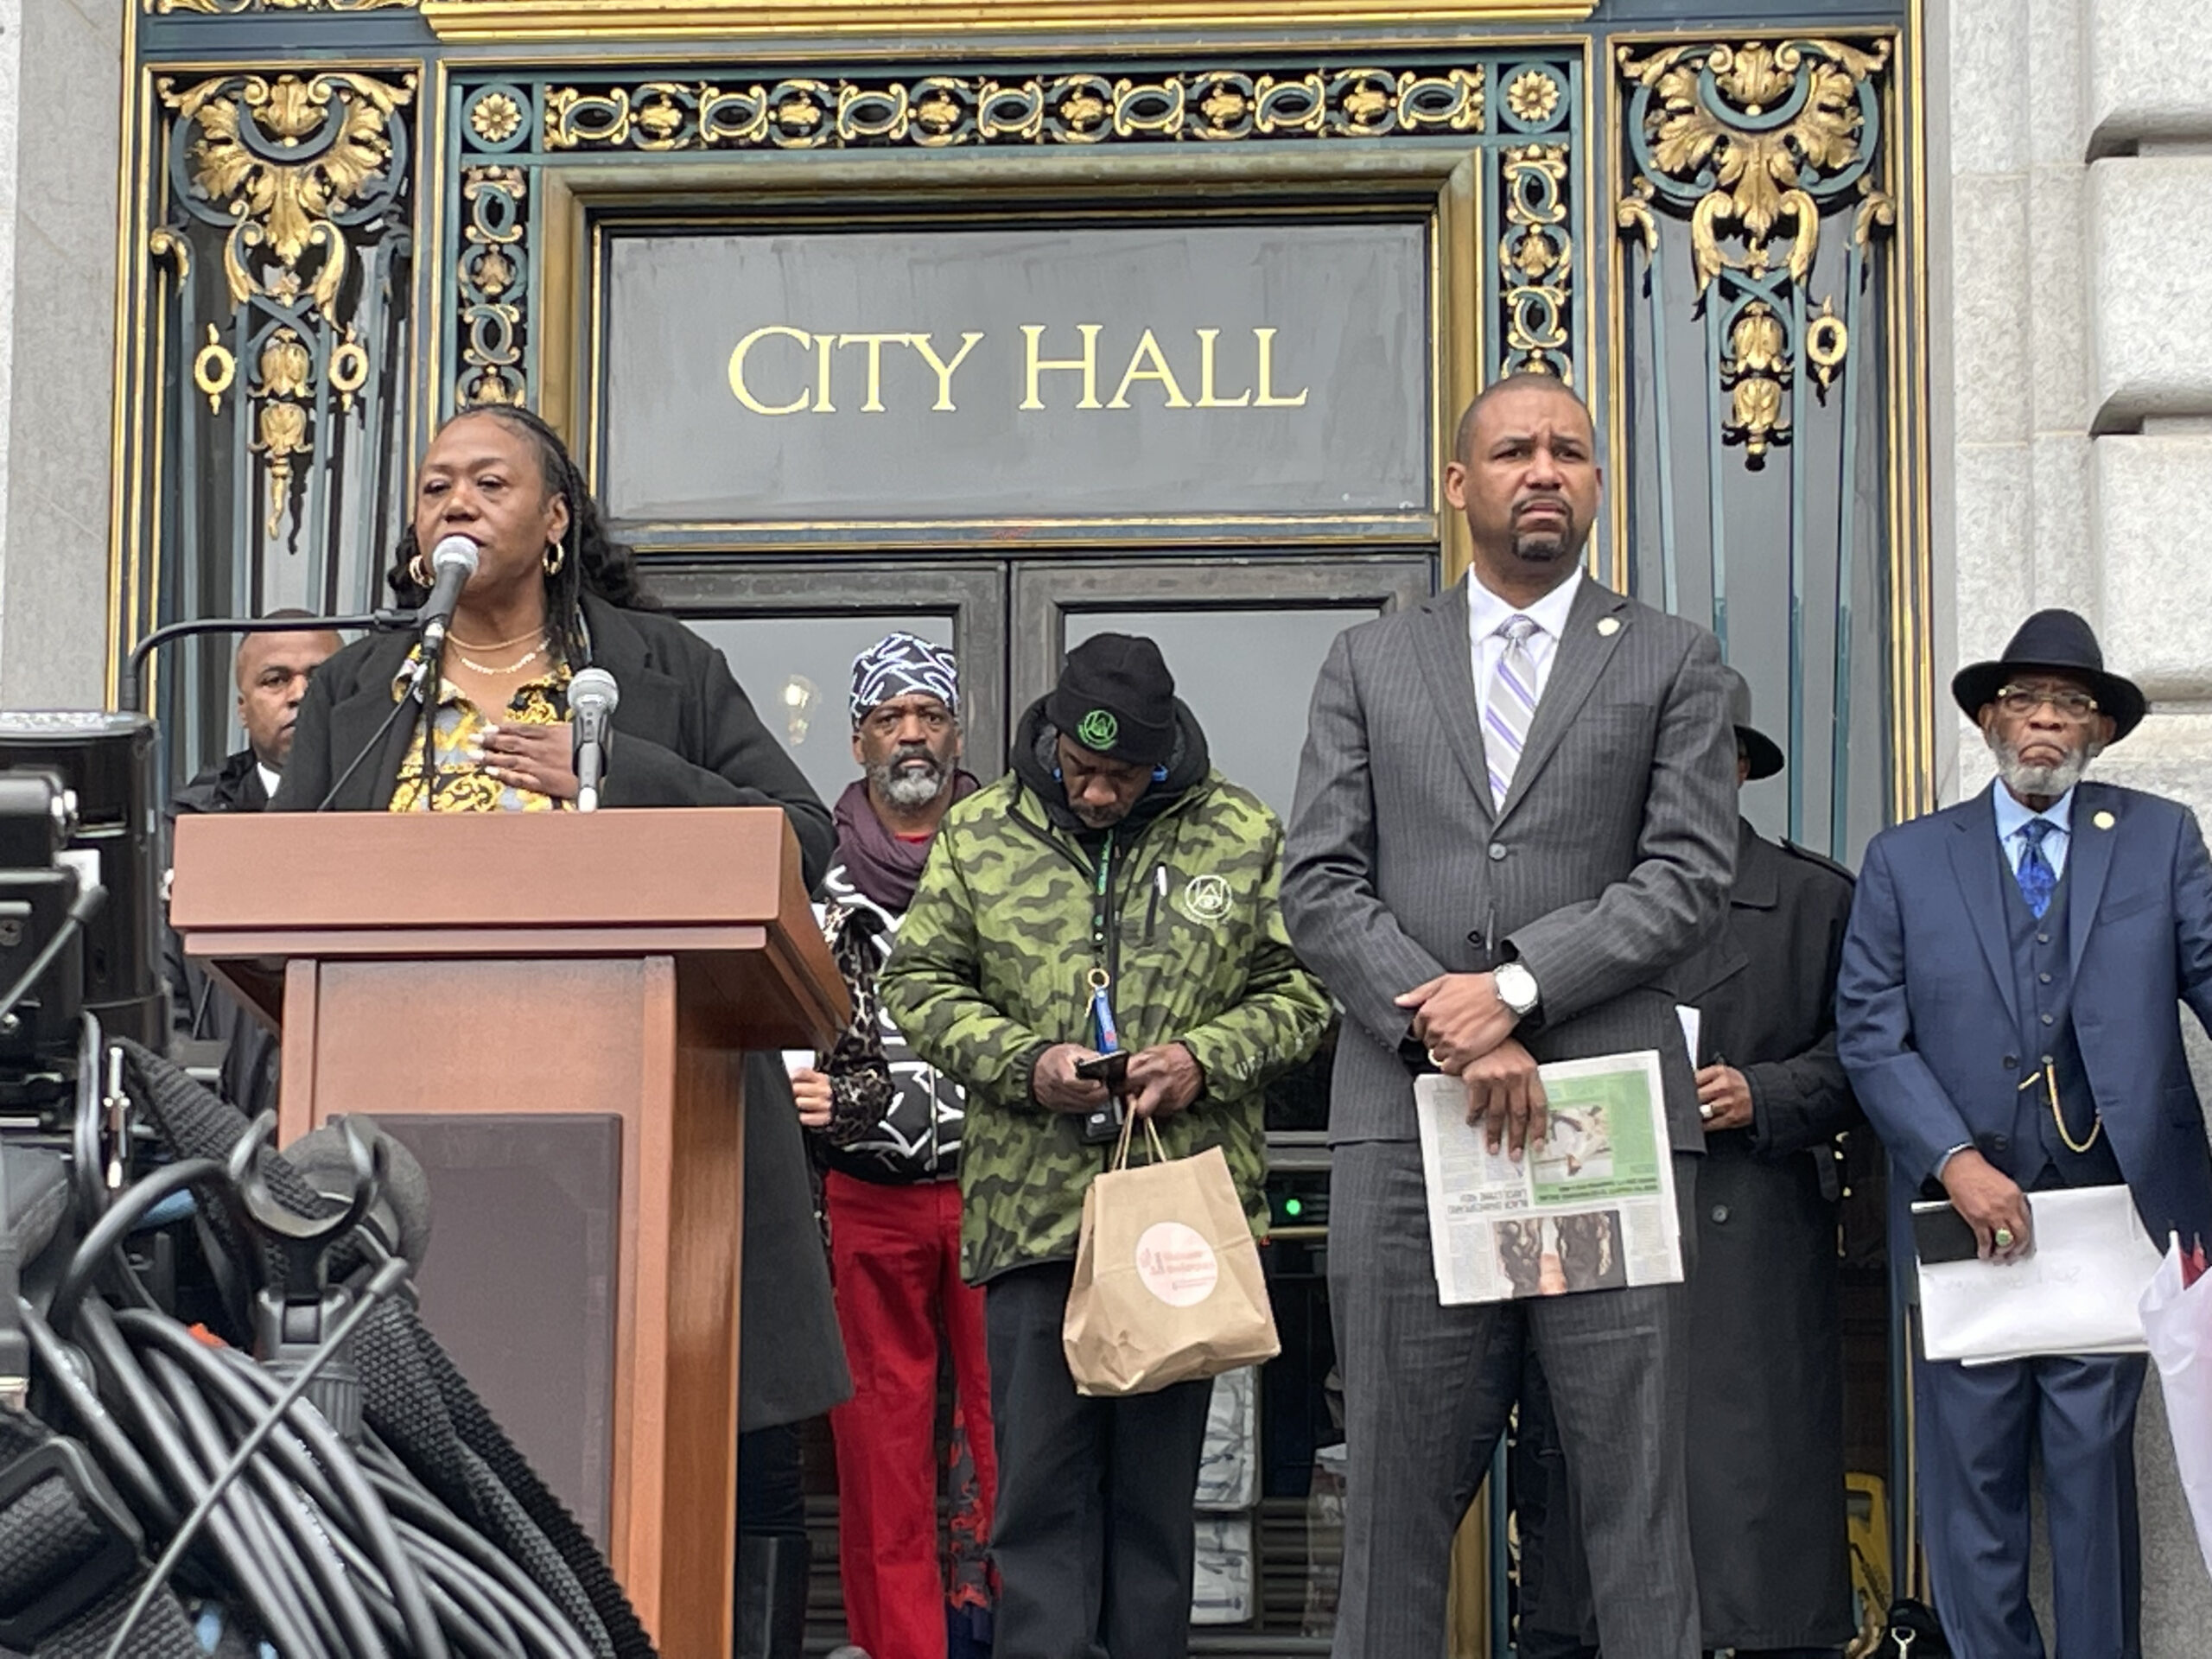 Tinisch Hollins, vice chair of the San Francisco African American Reparations Advisory Committee, addresses a crowd in support of reparations on the steps of San Francisco City Hall on Tuesday, March 14th, 2023. Hollins is flanked by San Francisco Board of Supervisors President Shamann Walton, who wrote legislation creating the committee. Photo credit: Daphne Young, Black News & Views.